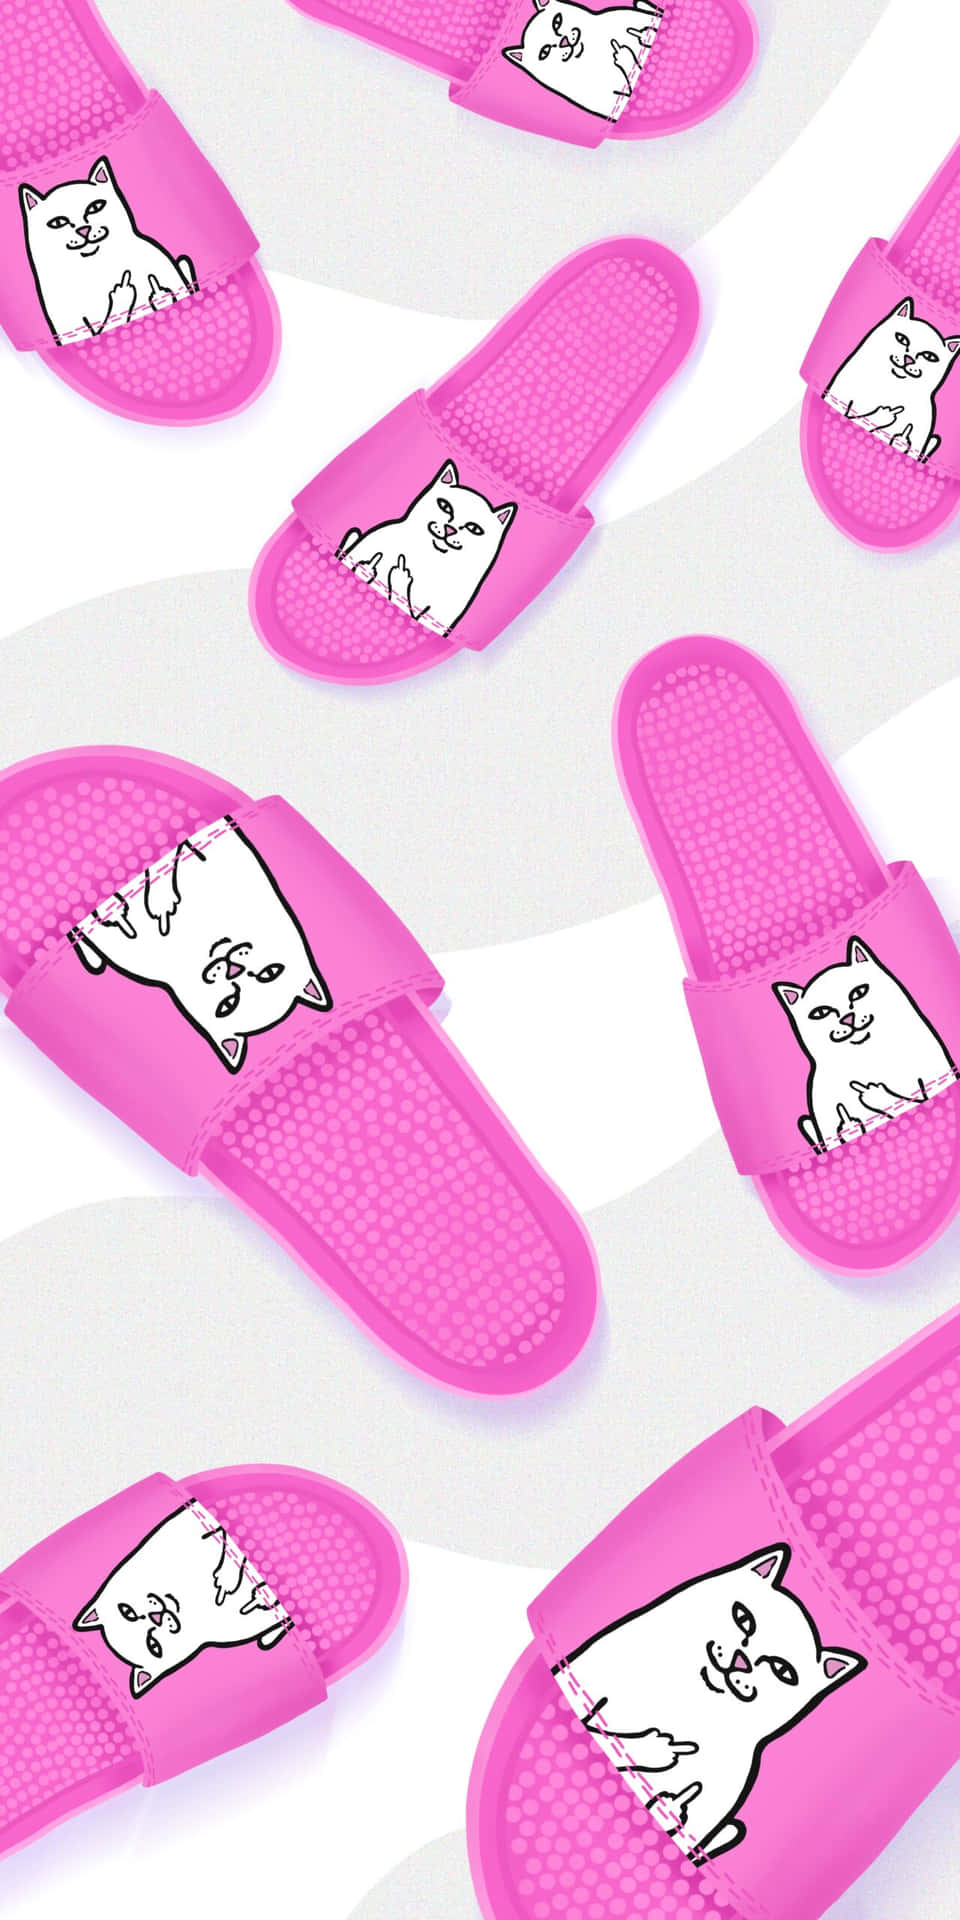 Skate, Slide, And Style The Streets With Ripndip!